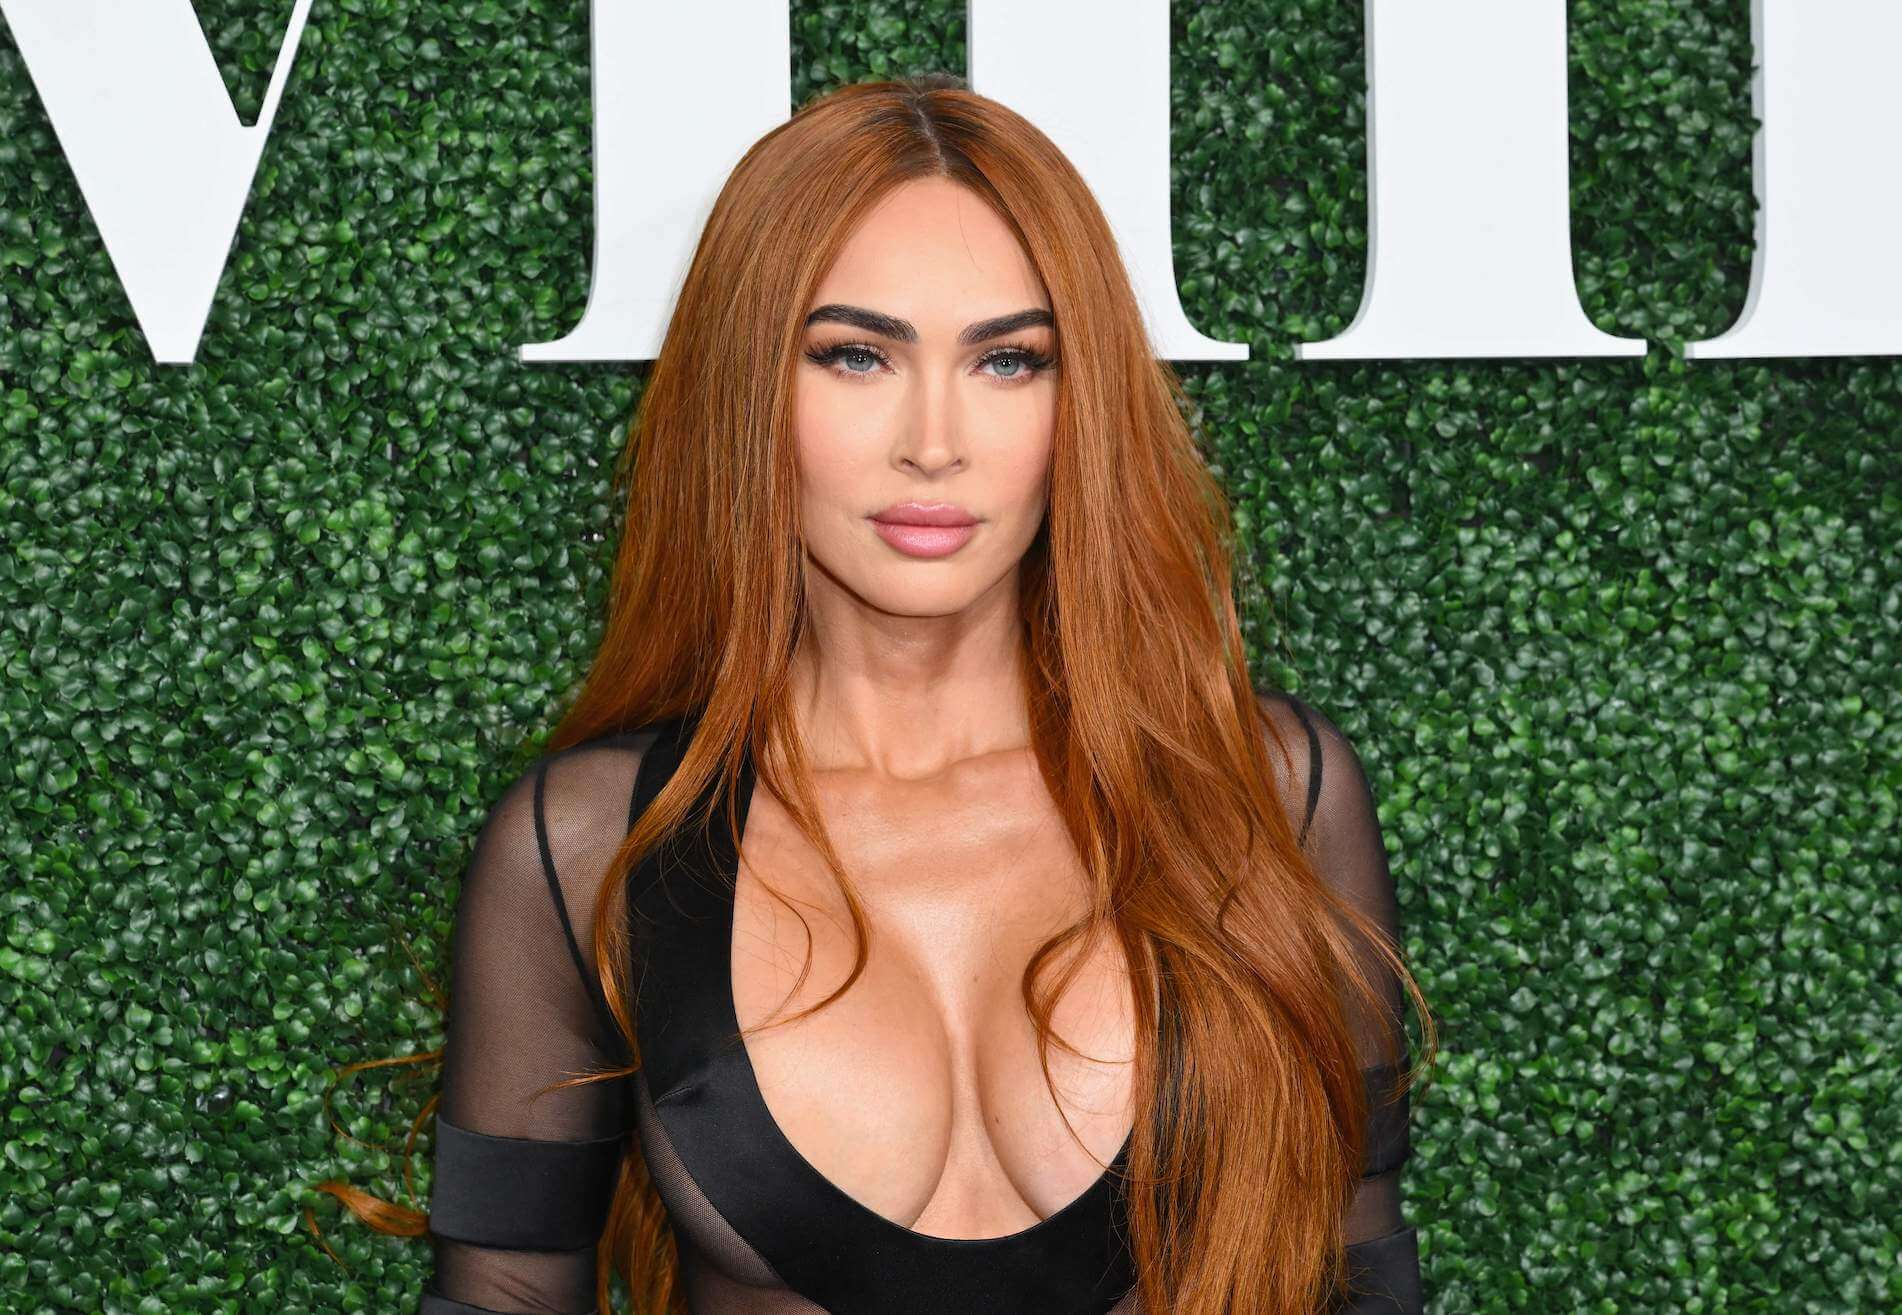 A close-up of Megan Fox at a Sports Illustrated event